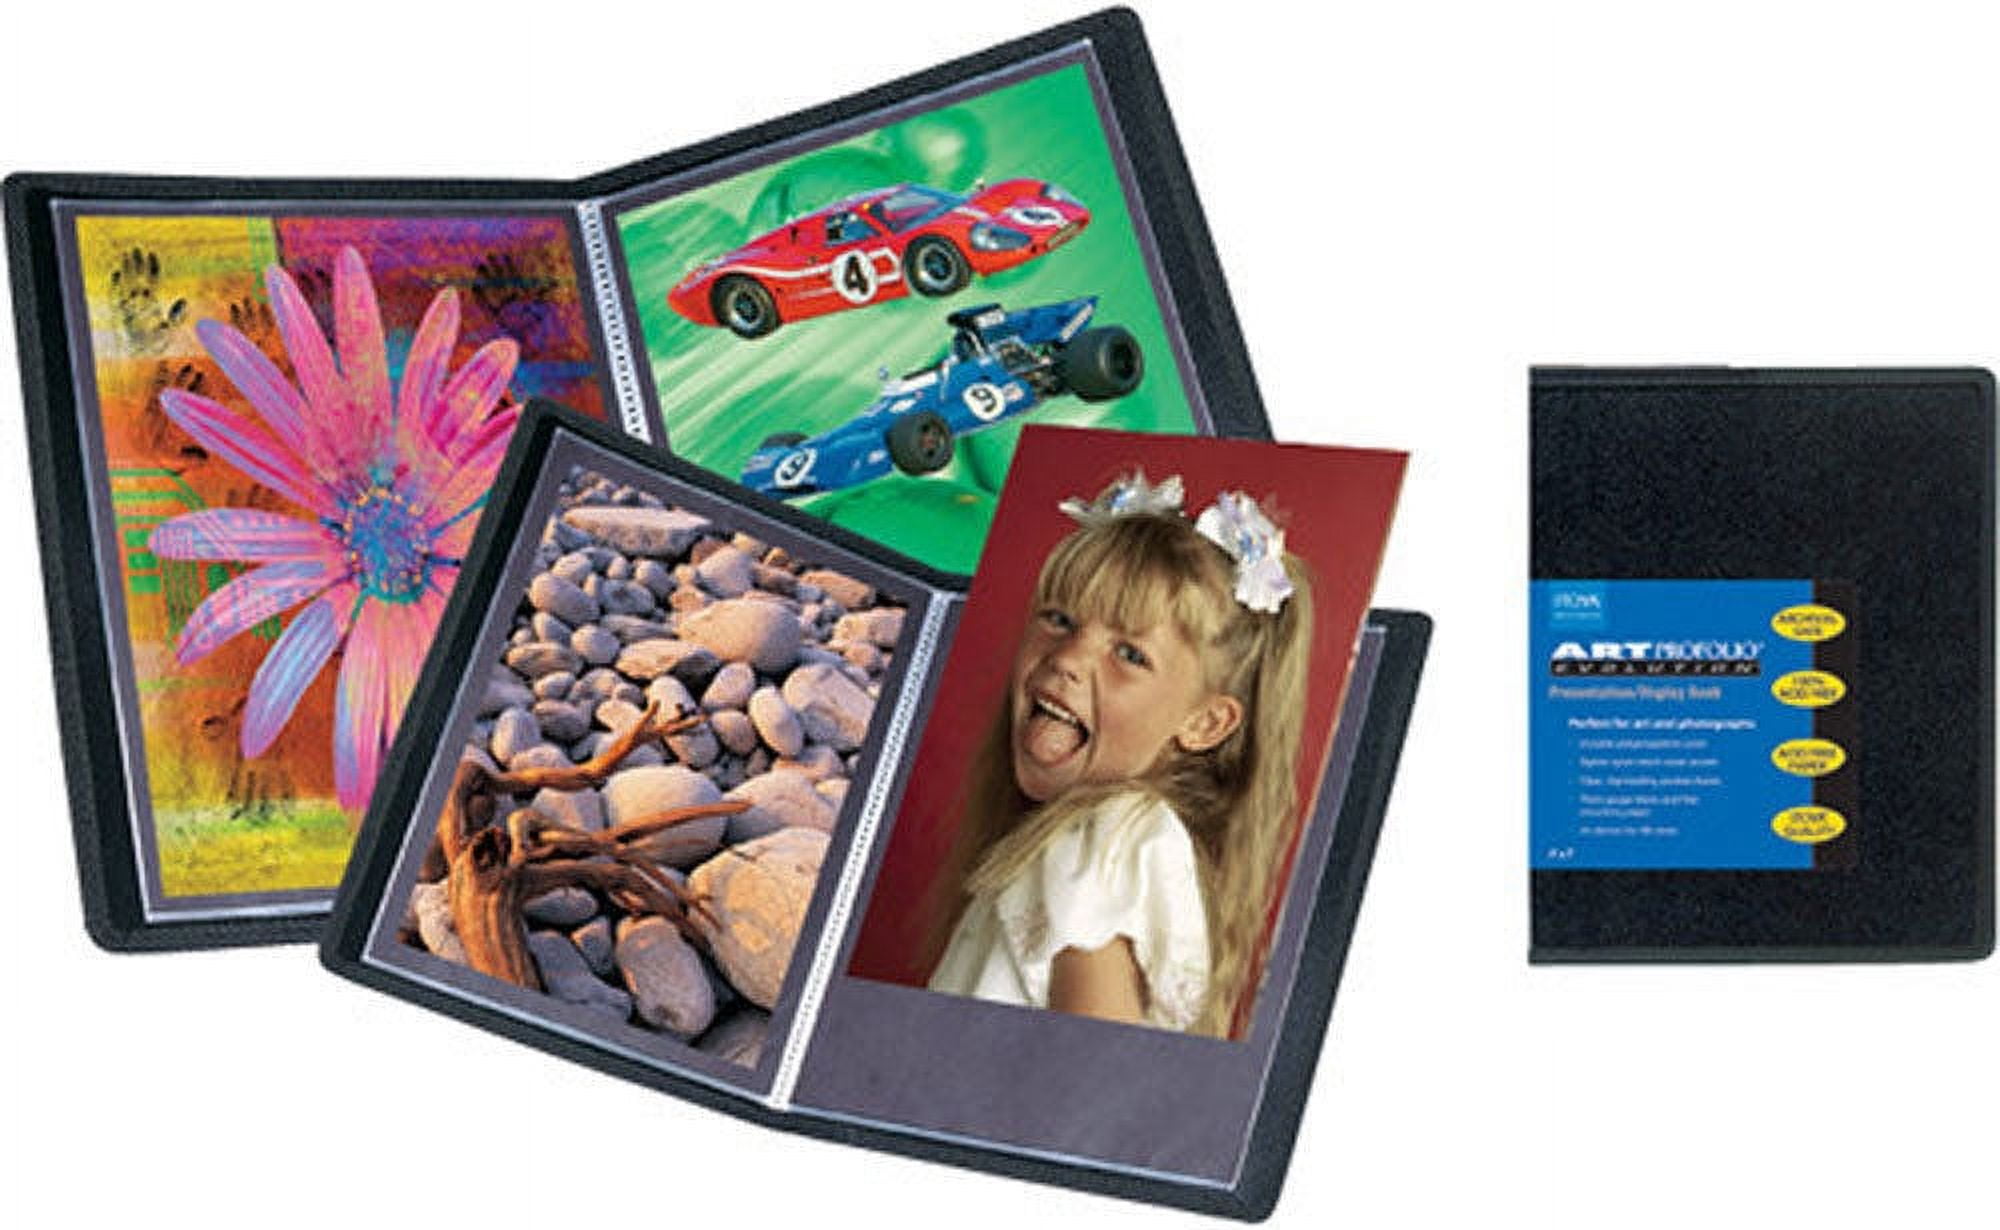 ART PROFOLIO ADVANTAGE for A6 (4.12x5.88) size documents by ITOYA® -  Picture Frames, Photo Albums, Personalized and Engraved Digital Photo Gifts  - SendAFrame